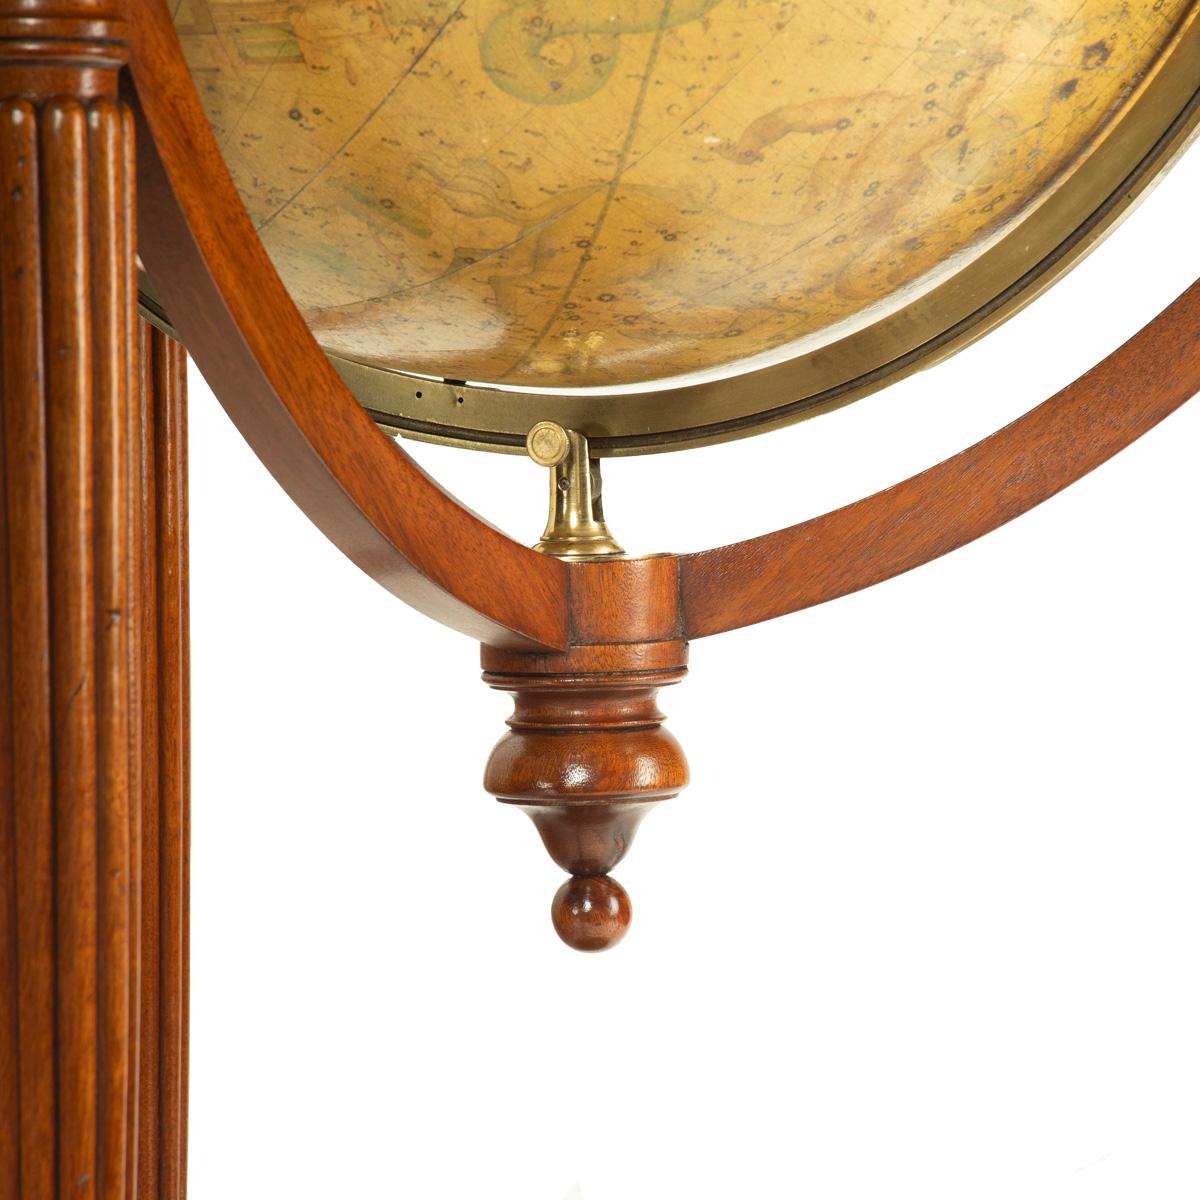 A pair of mahogany Regency 21-inch globes by J&W Cary dated 1799 and 1819 For Sale 10